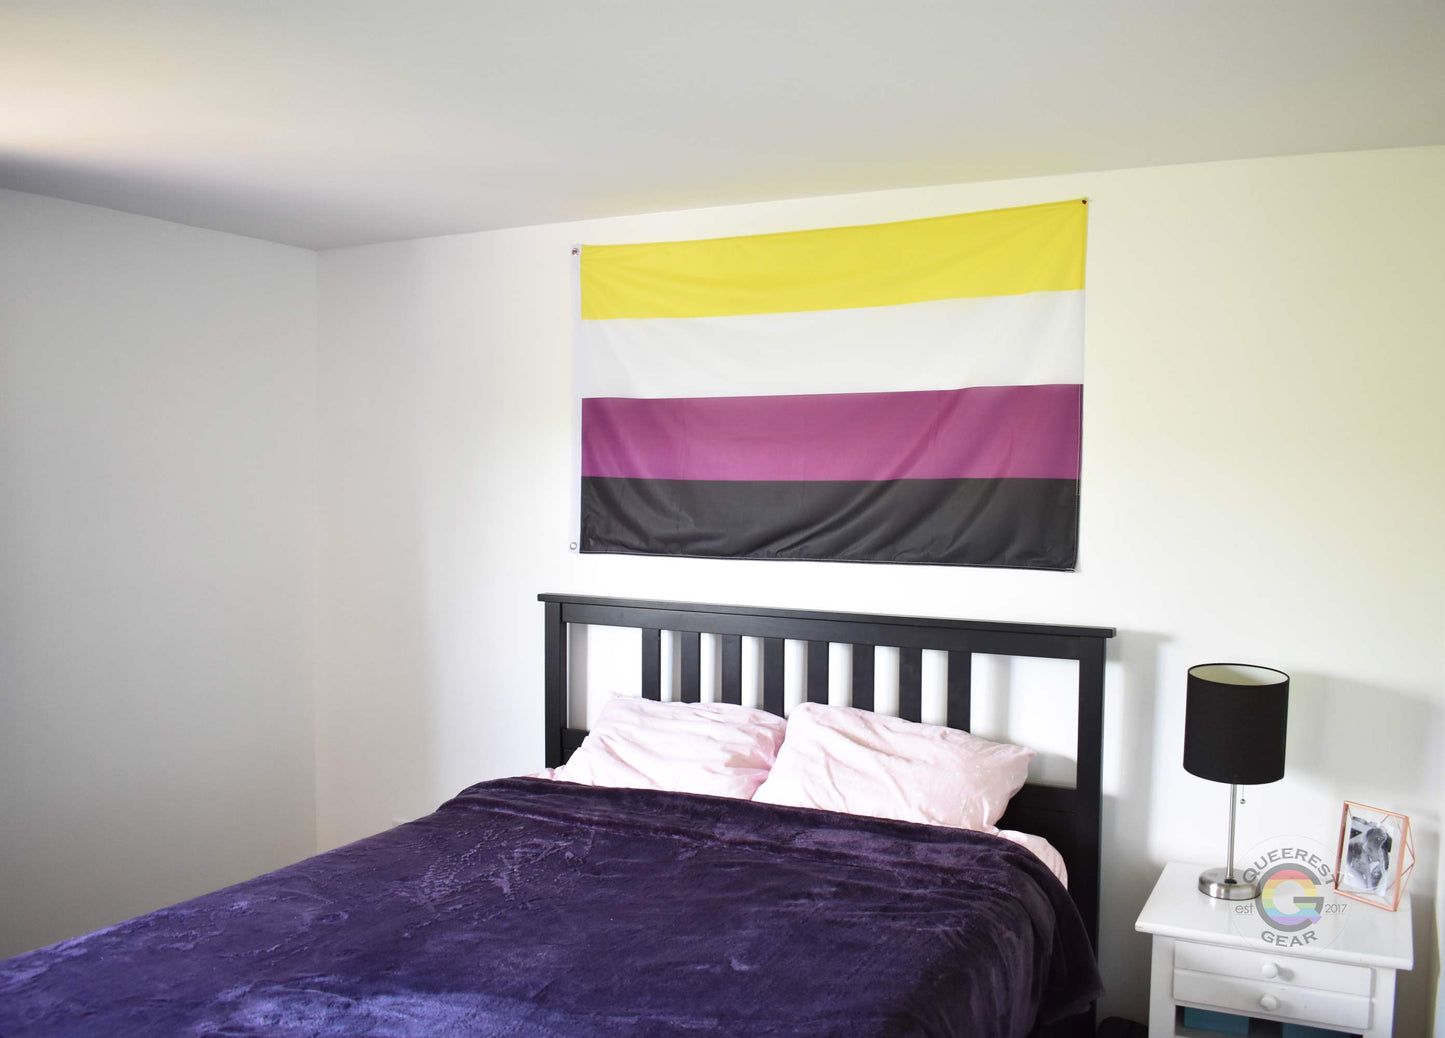 3’x5’ nonbinary pride flag hanging horizontally on the wall of a bedroom centered above a bed with a purple blanket